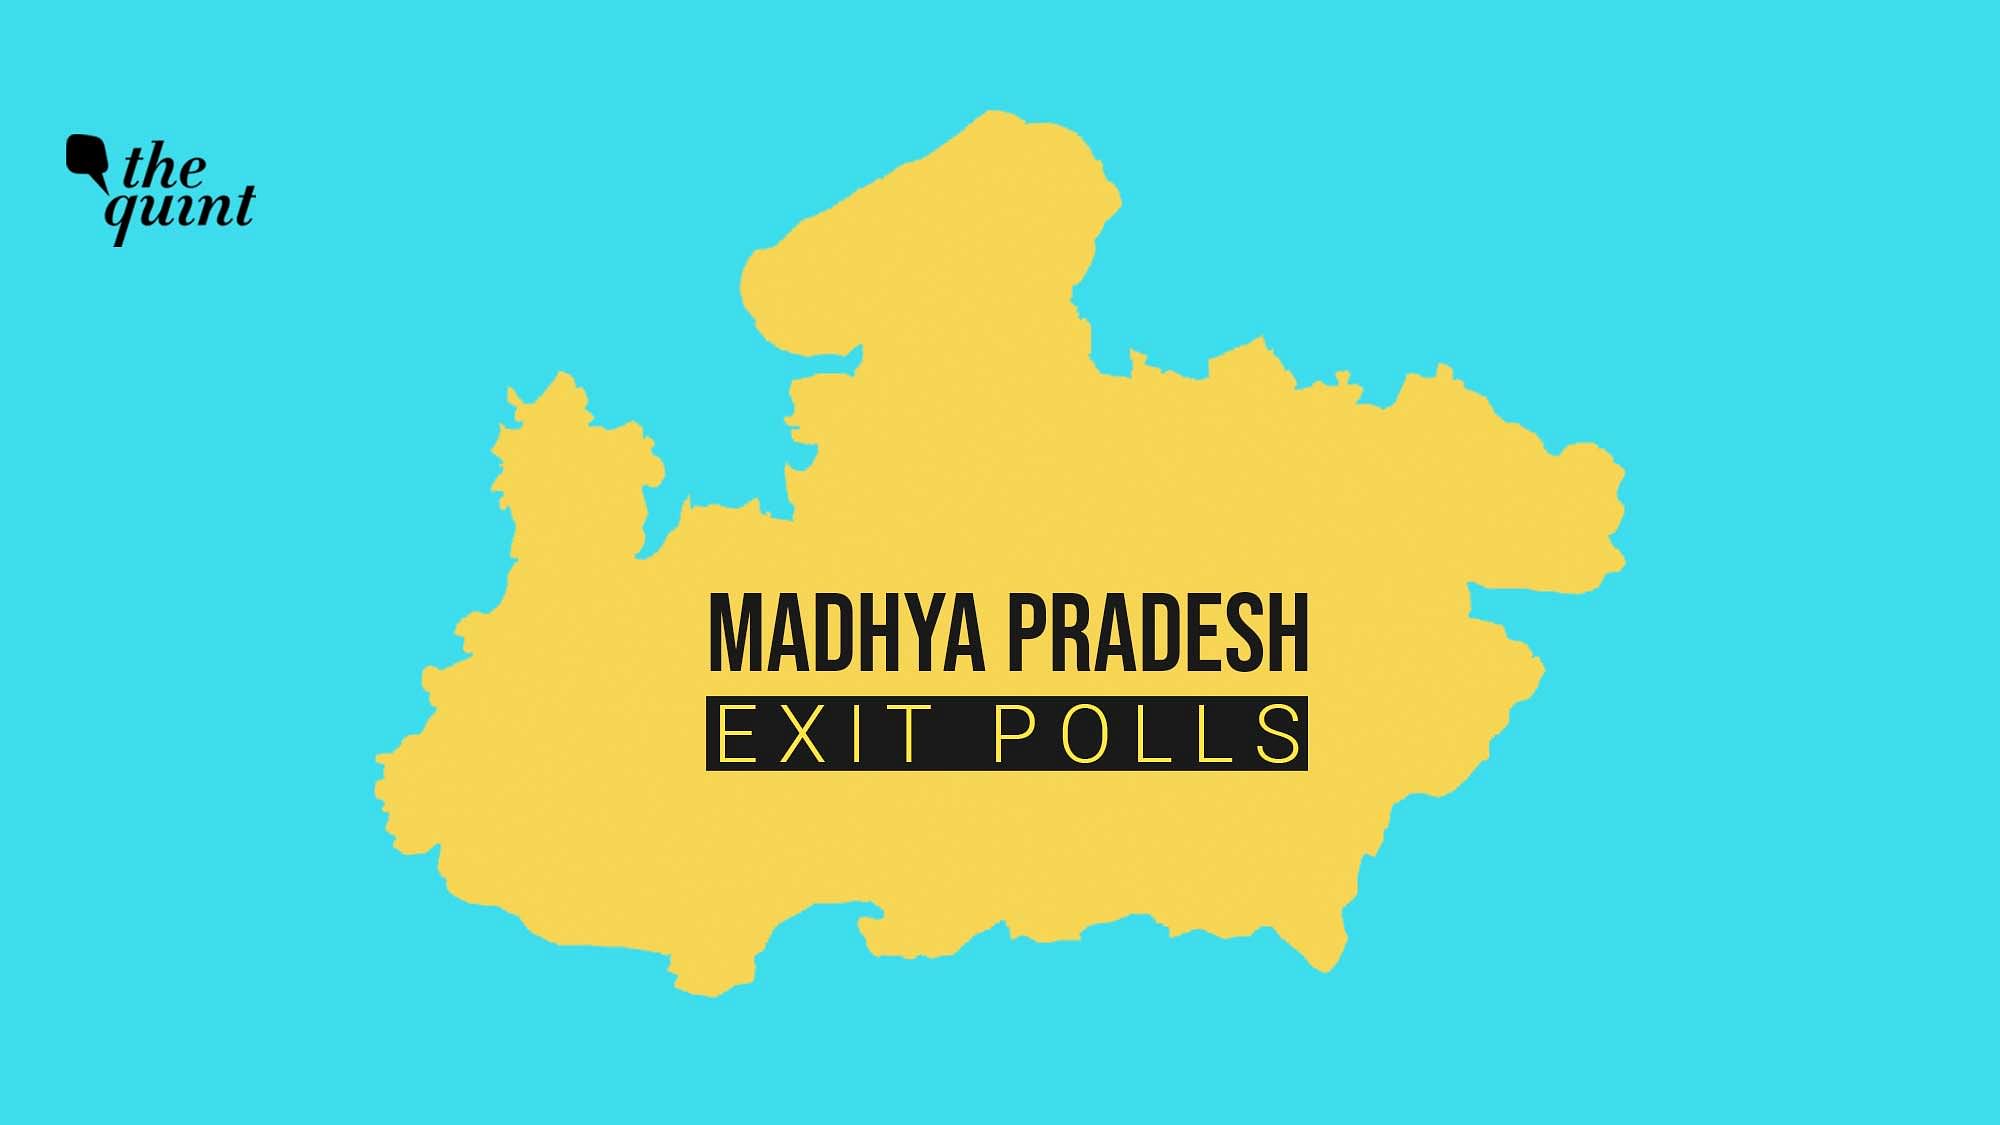 The India Today-Axis exit polls predicted that the BJP will secure 26-18 seats in the Madhya Pradesh bypolls, while the Congress may get 10 to 12 seats